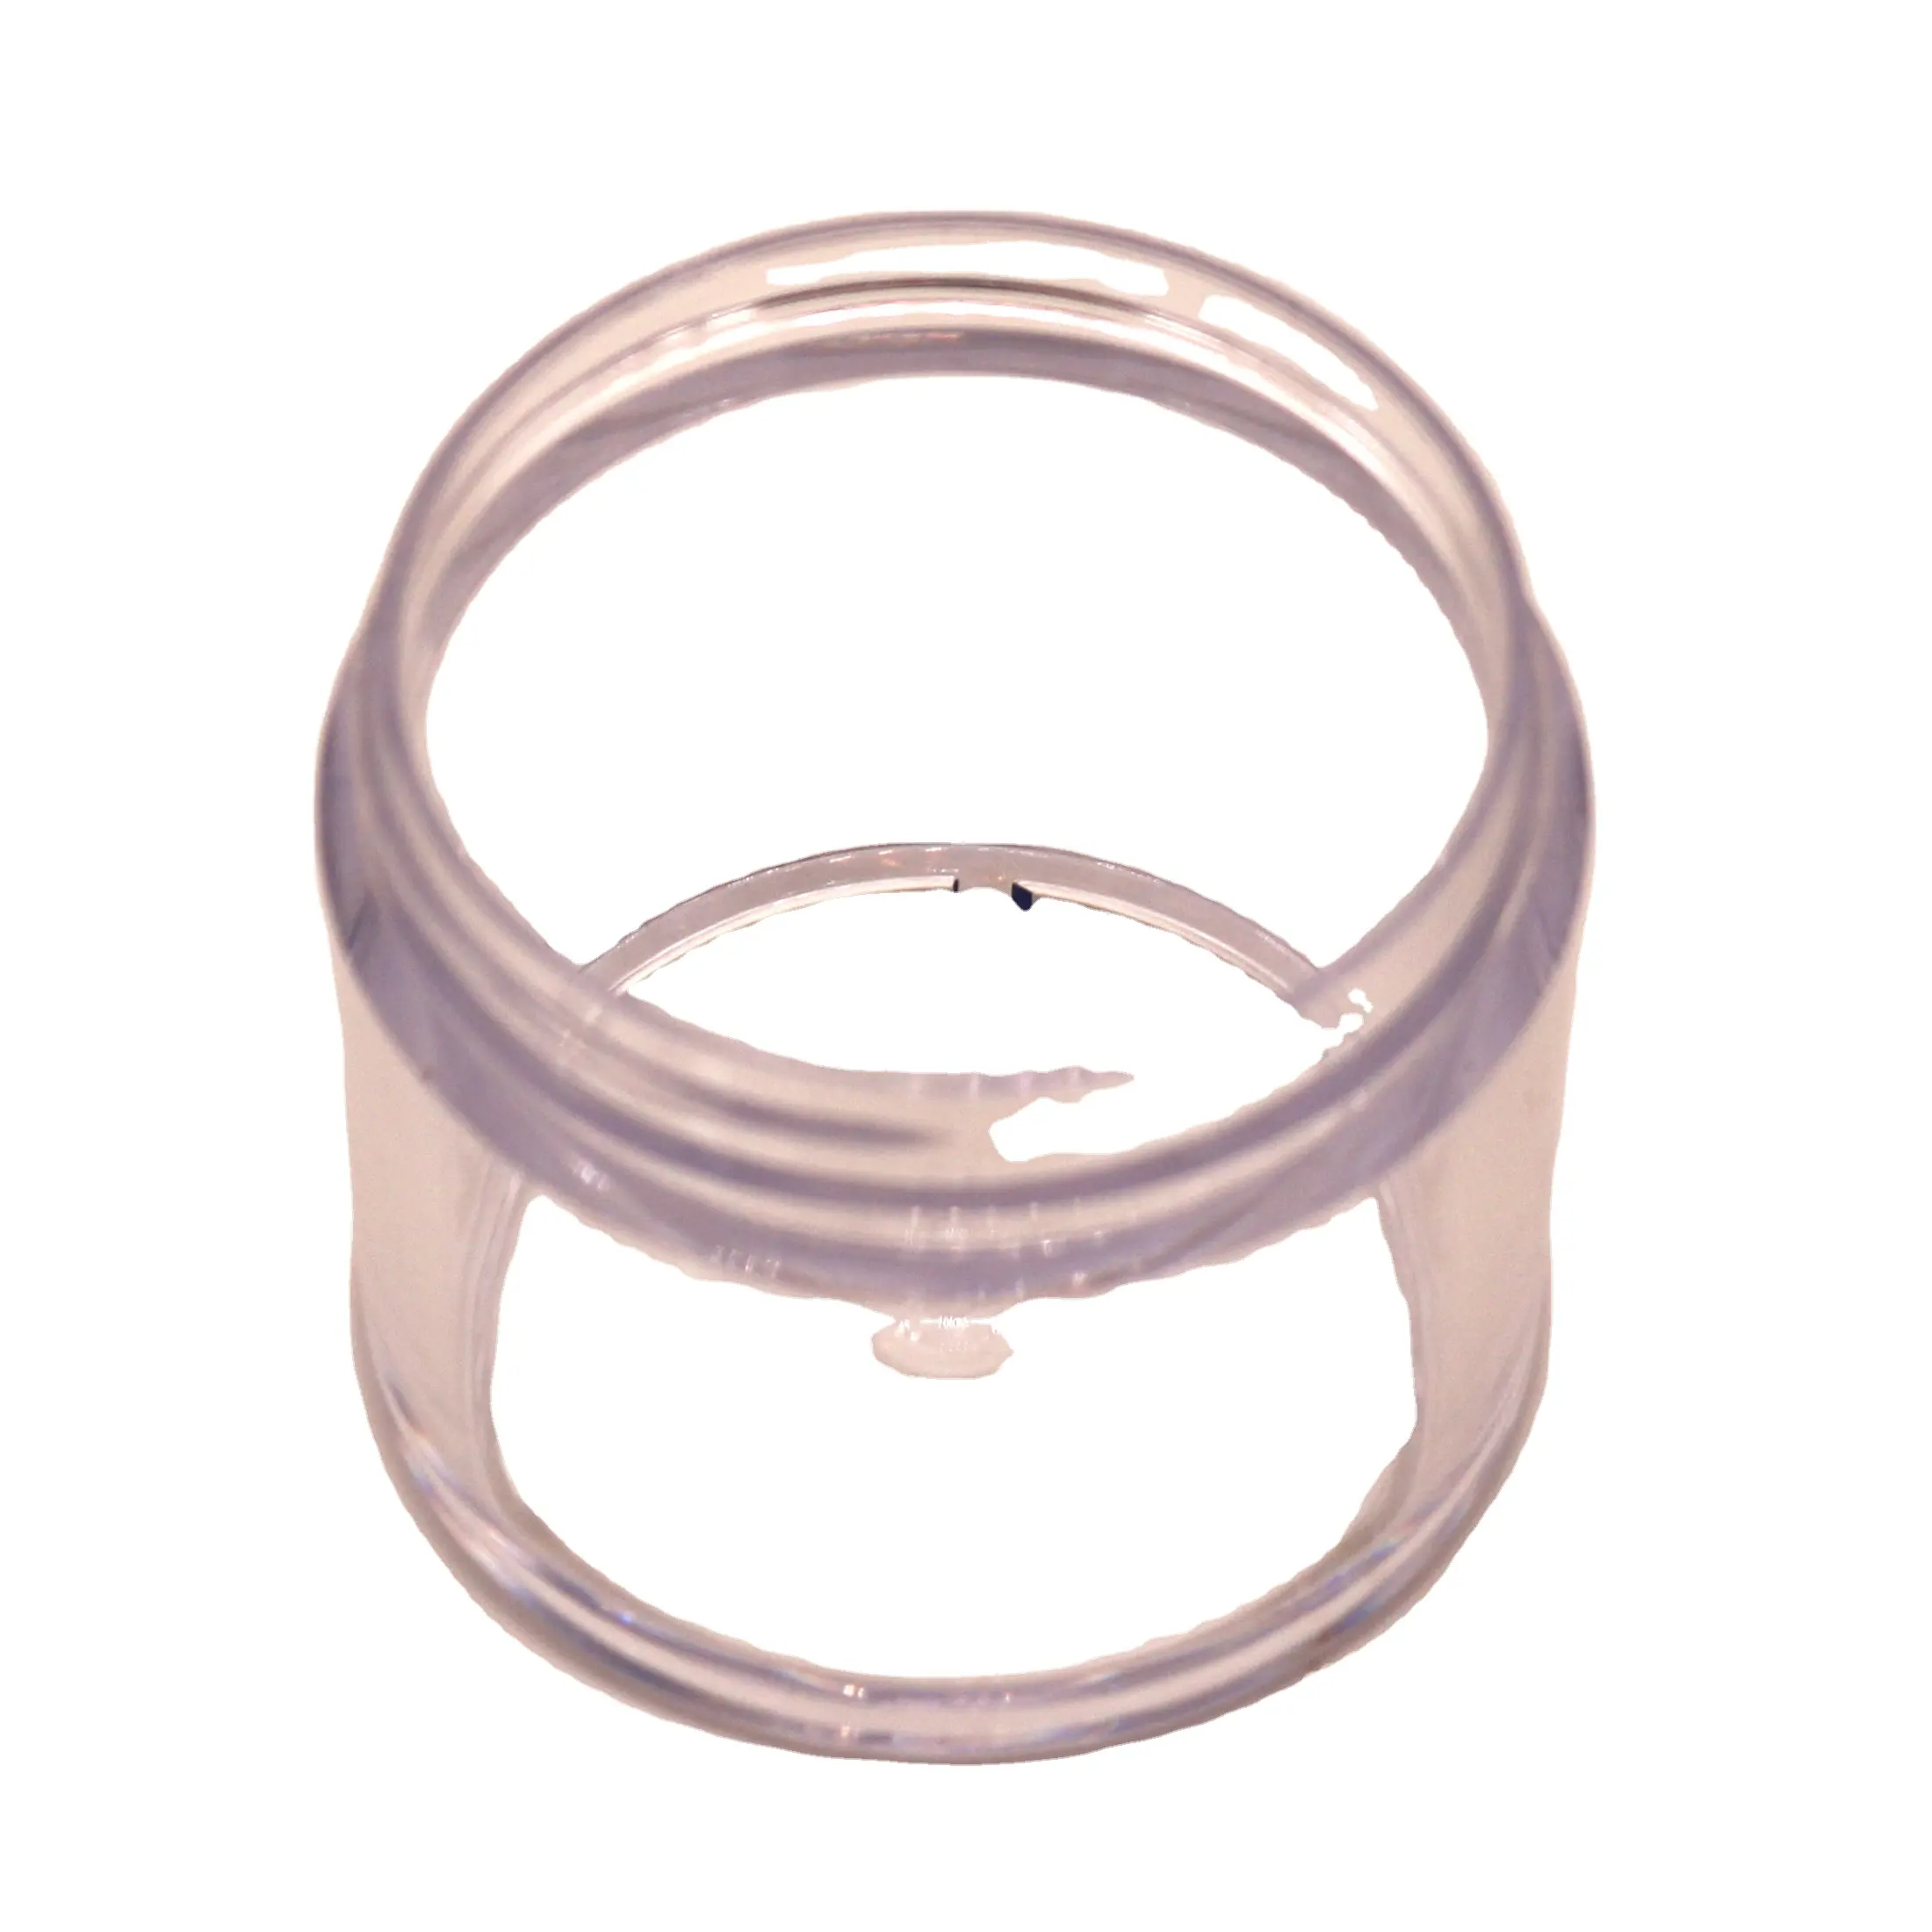 ISO Certified Factory's Custom-Made Silicone Rubber Injection Molded Sealing Ring Parts Various Use ABS PP Moldings Packaging